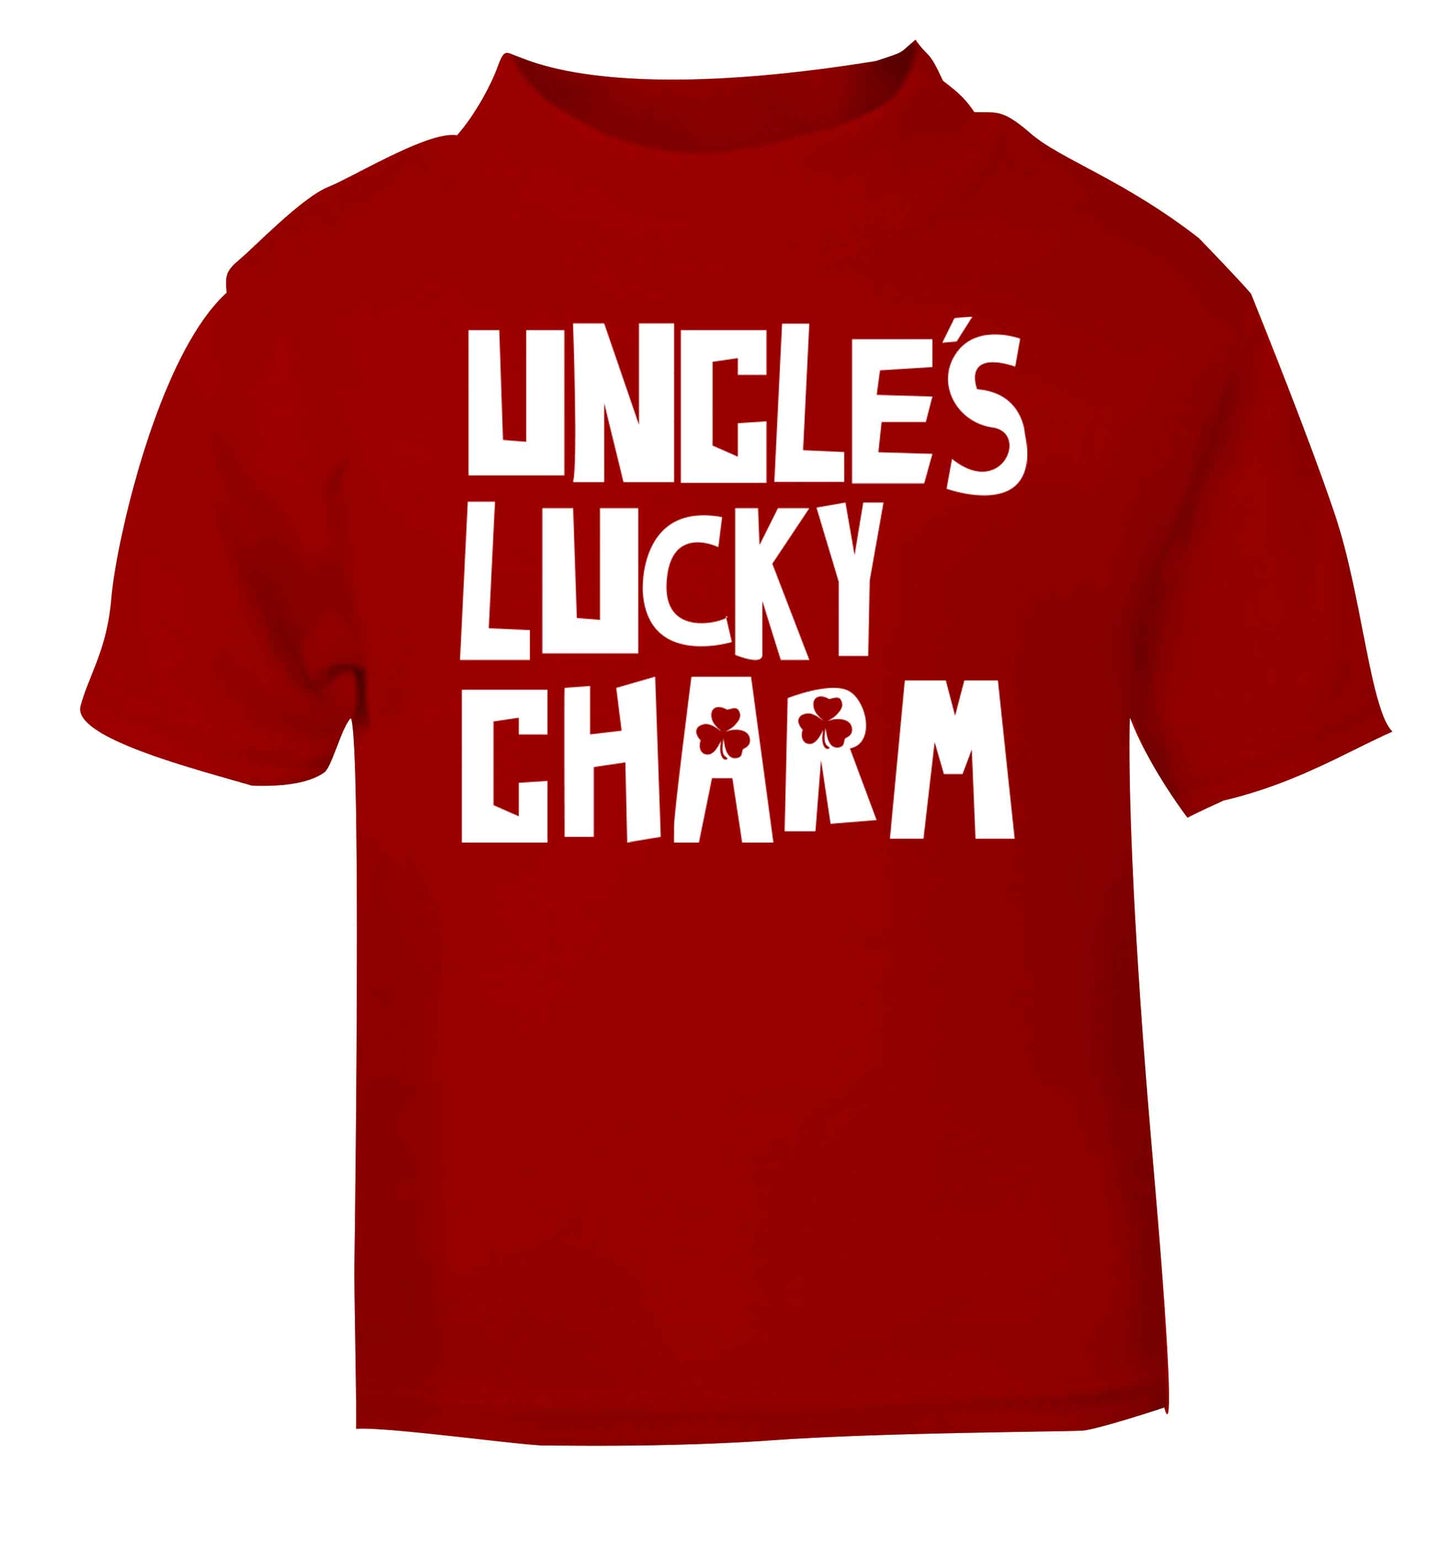 Uncles lucky charm red baby toddler Tshirt 2 Years